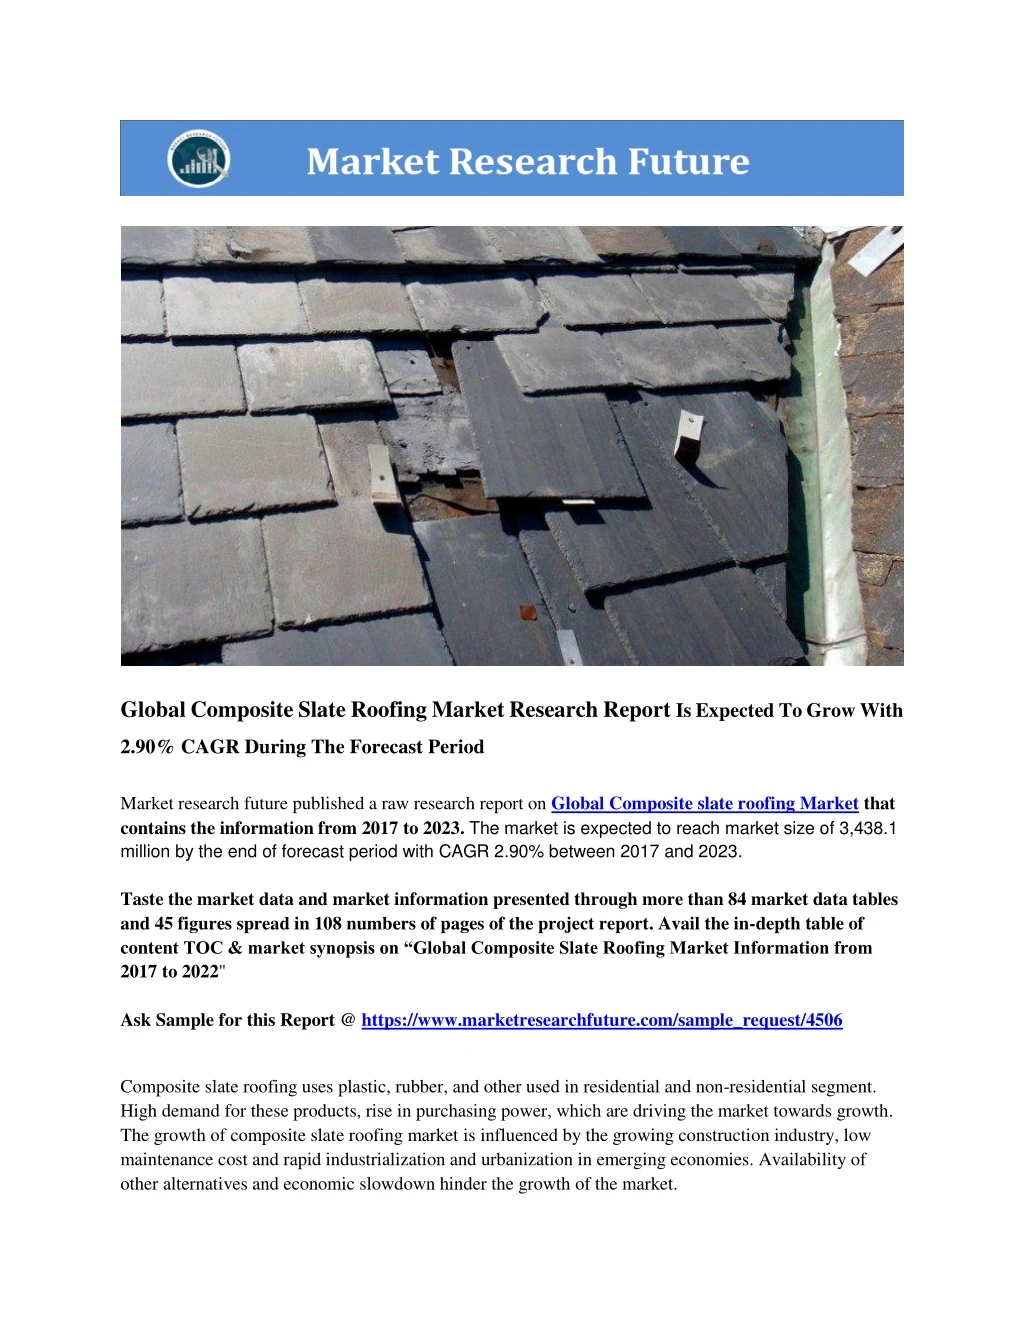 global composite slate roofing market research